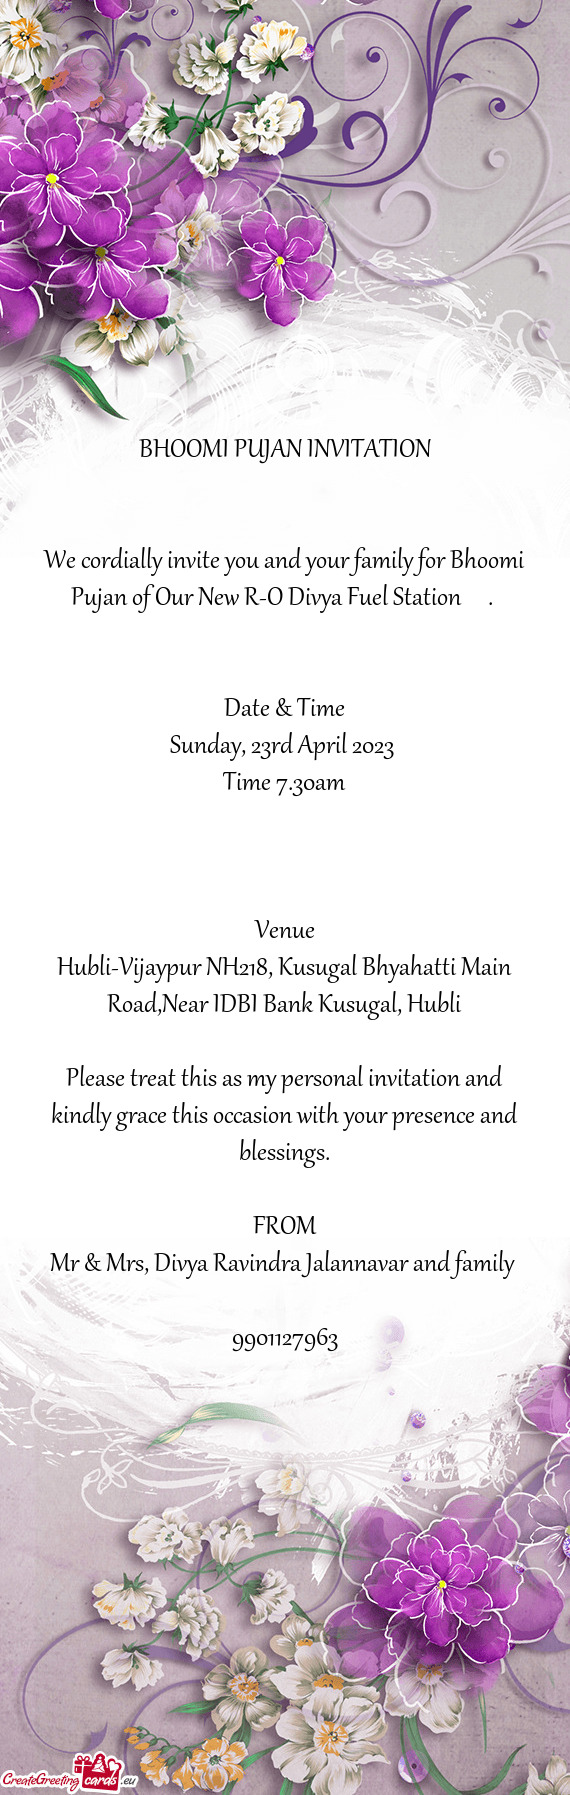 We cordially invite you and your family for Bhoomi Pujan of Our New R-O Divya Fuel Station ⛽️